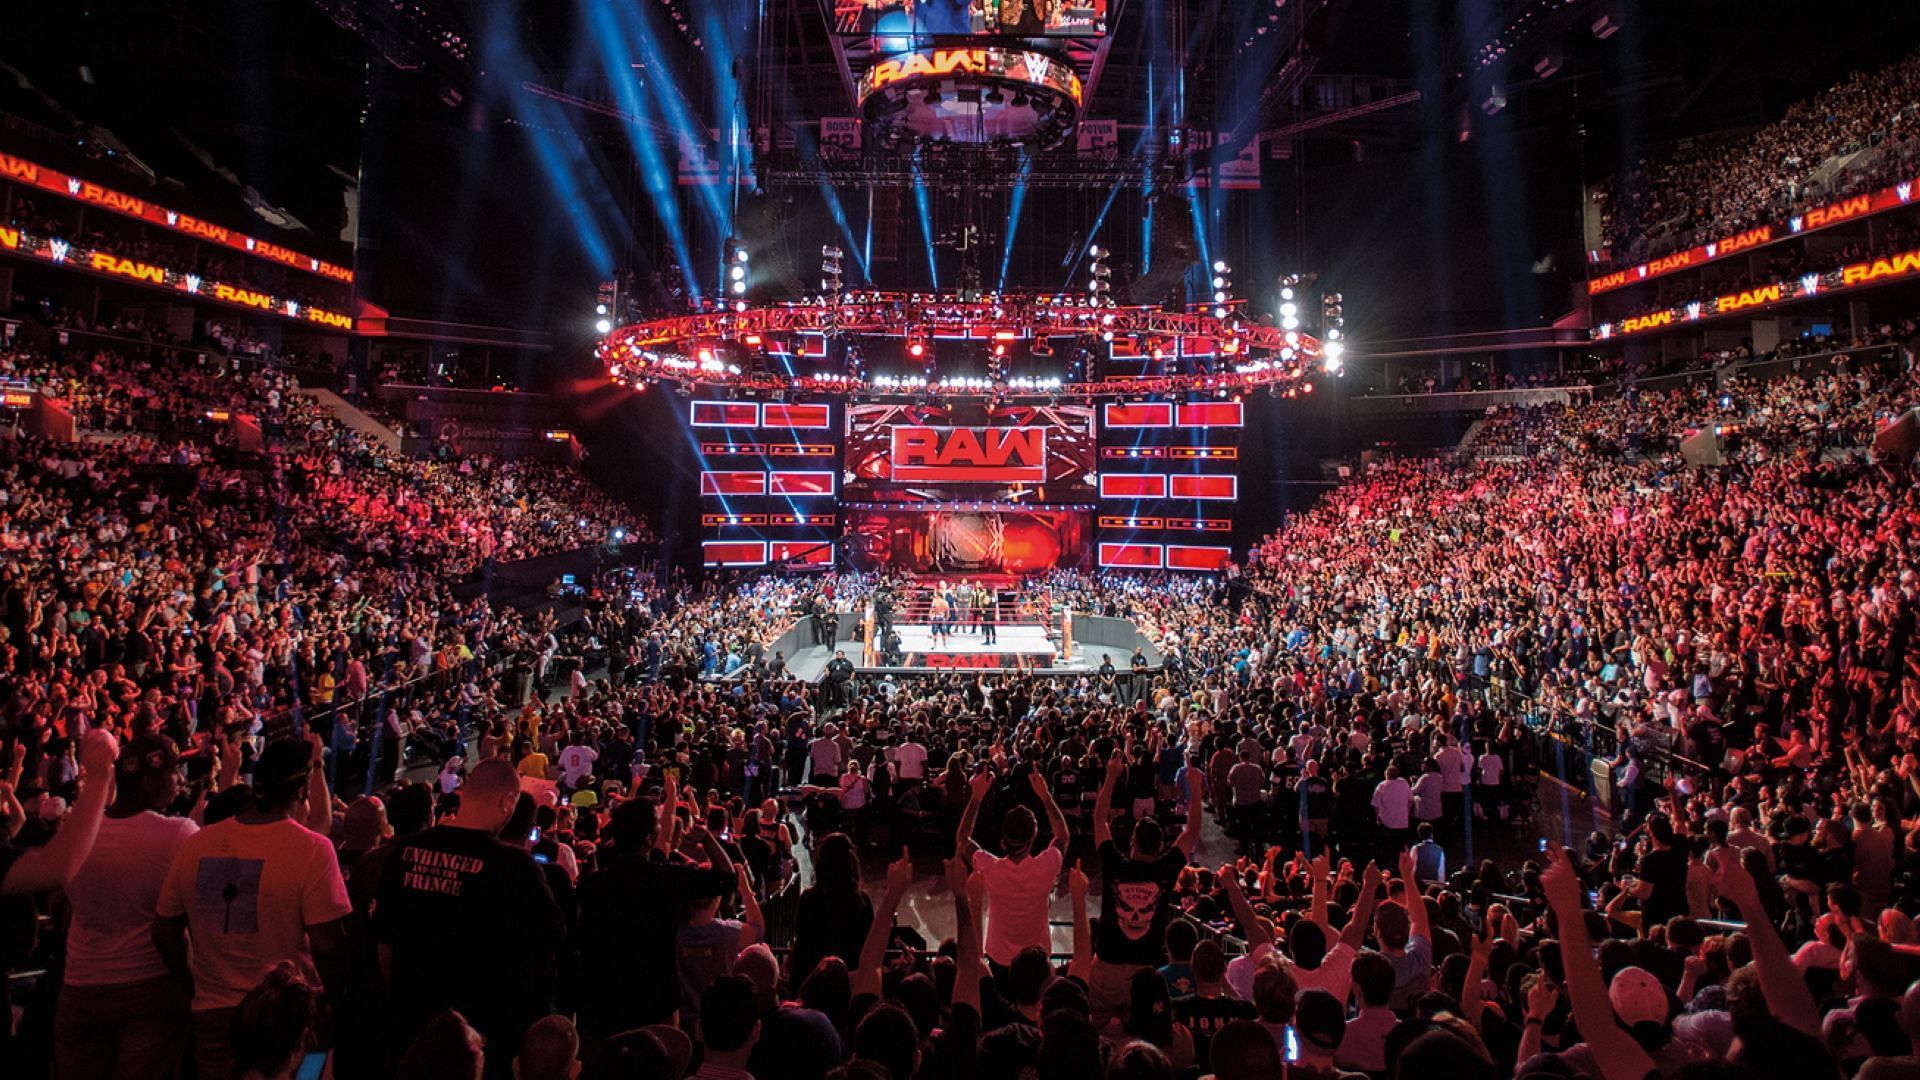 The WWE RAW ring and stage on display inside arena